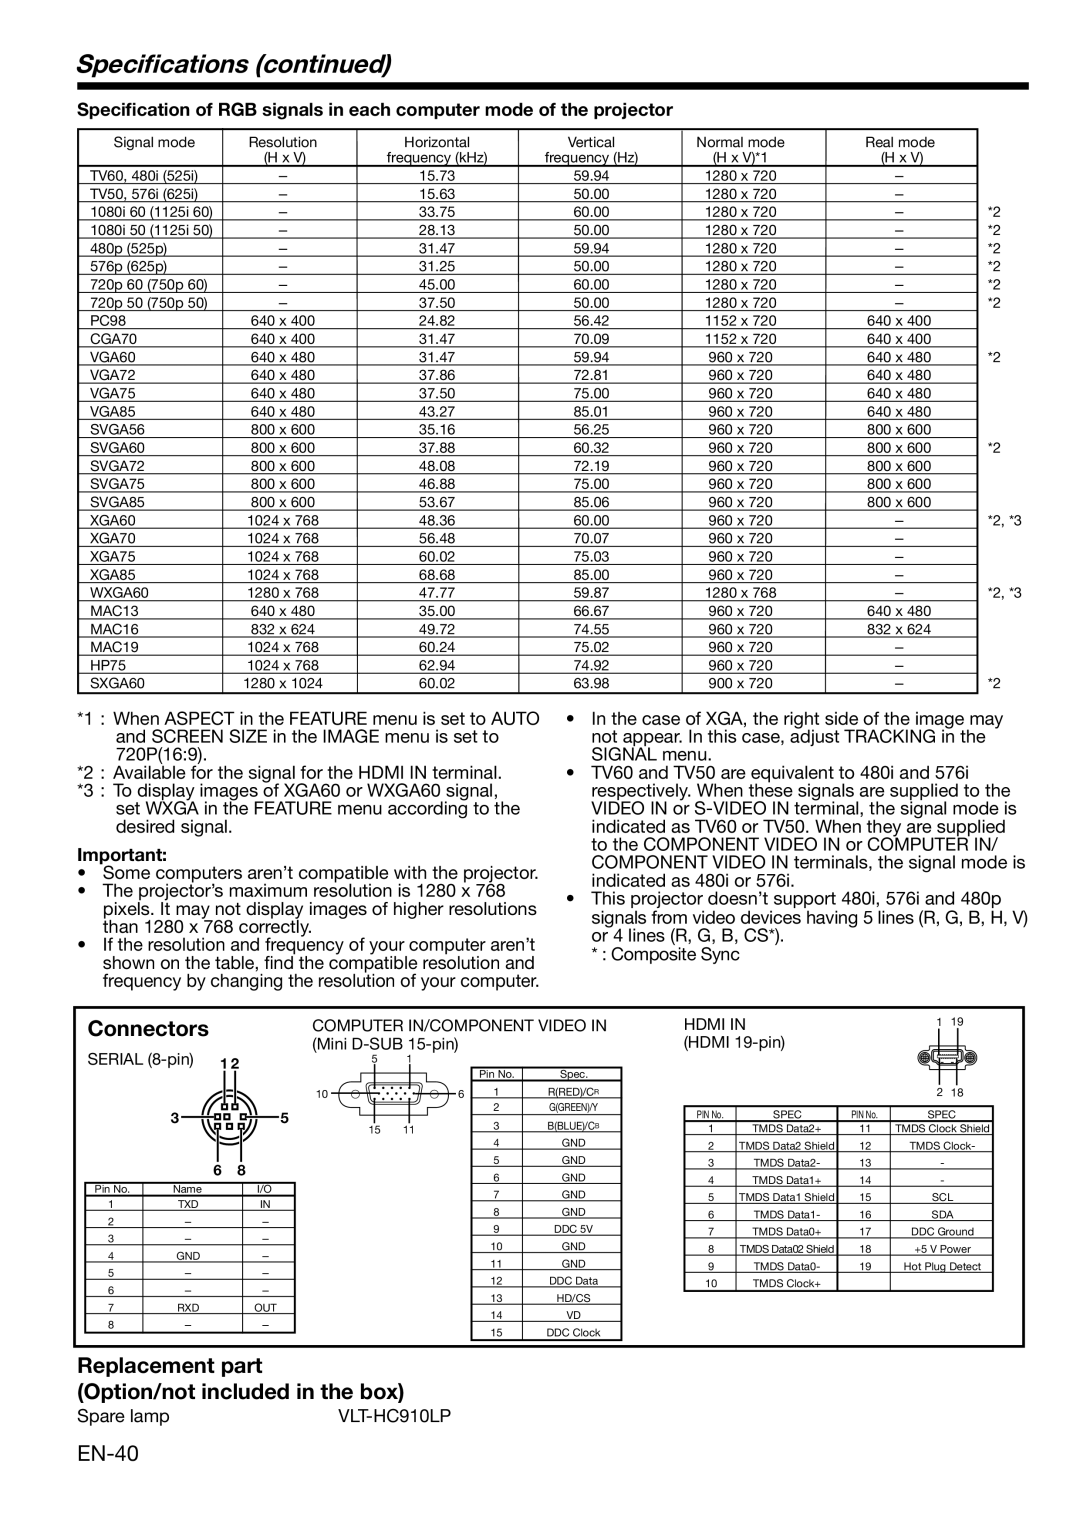 Mitsubishi Electronics HC3100 Speciﬁcations continued, Connectors, Replacement part, Option/not included in the box 